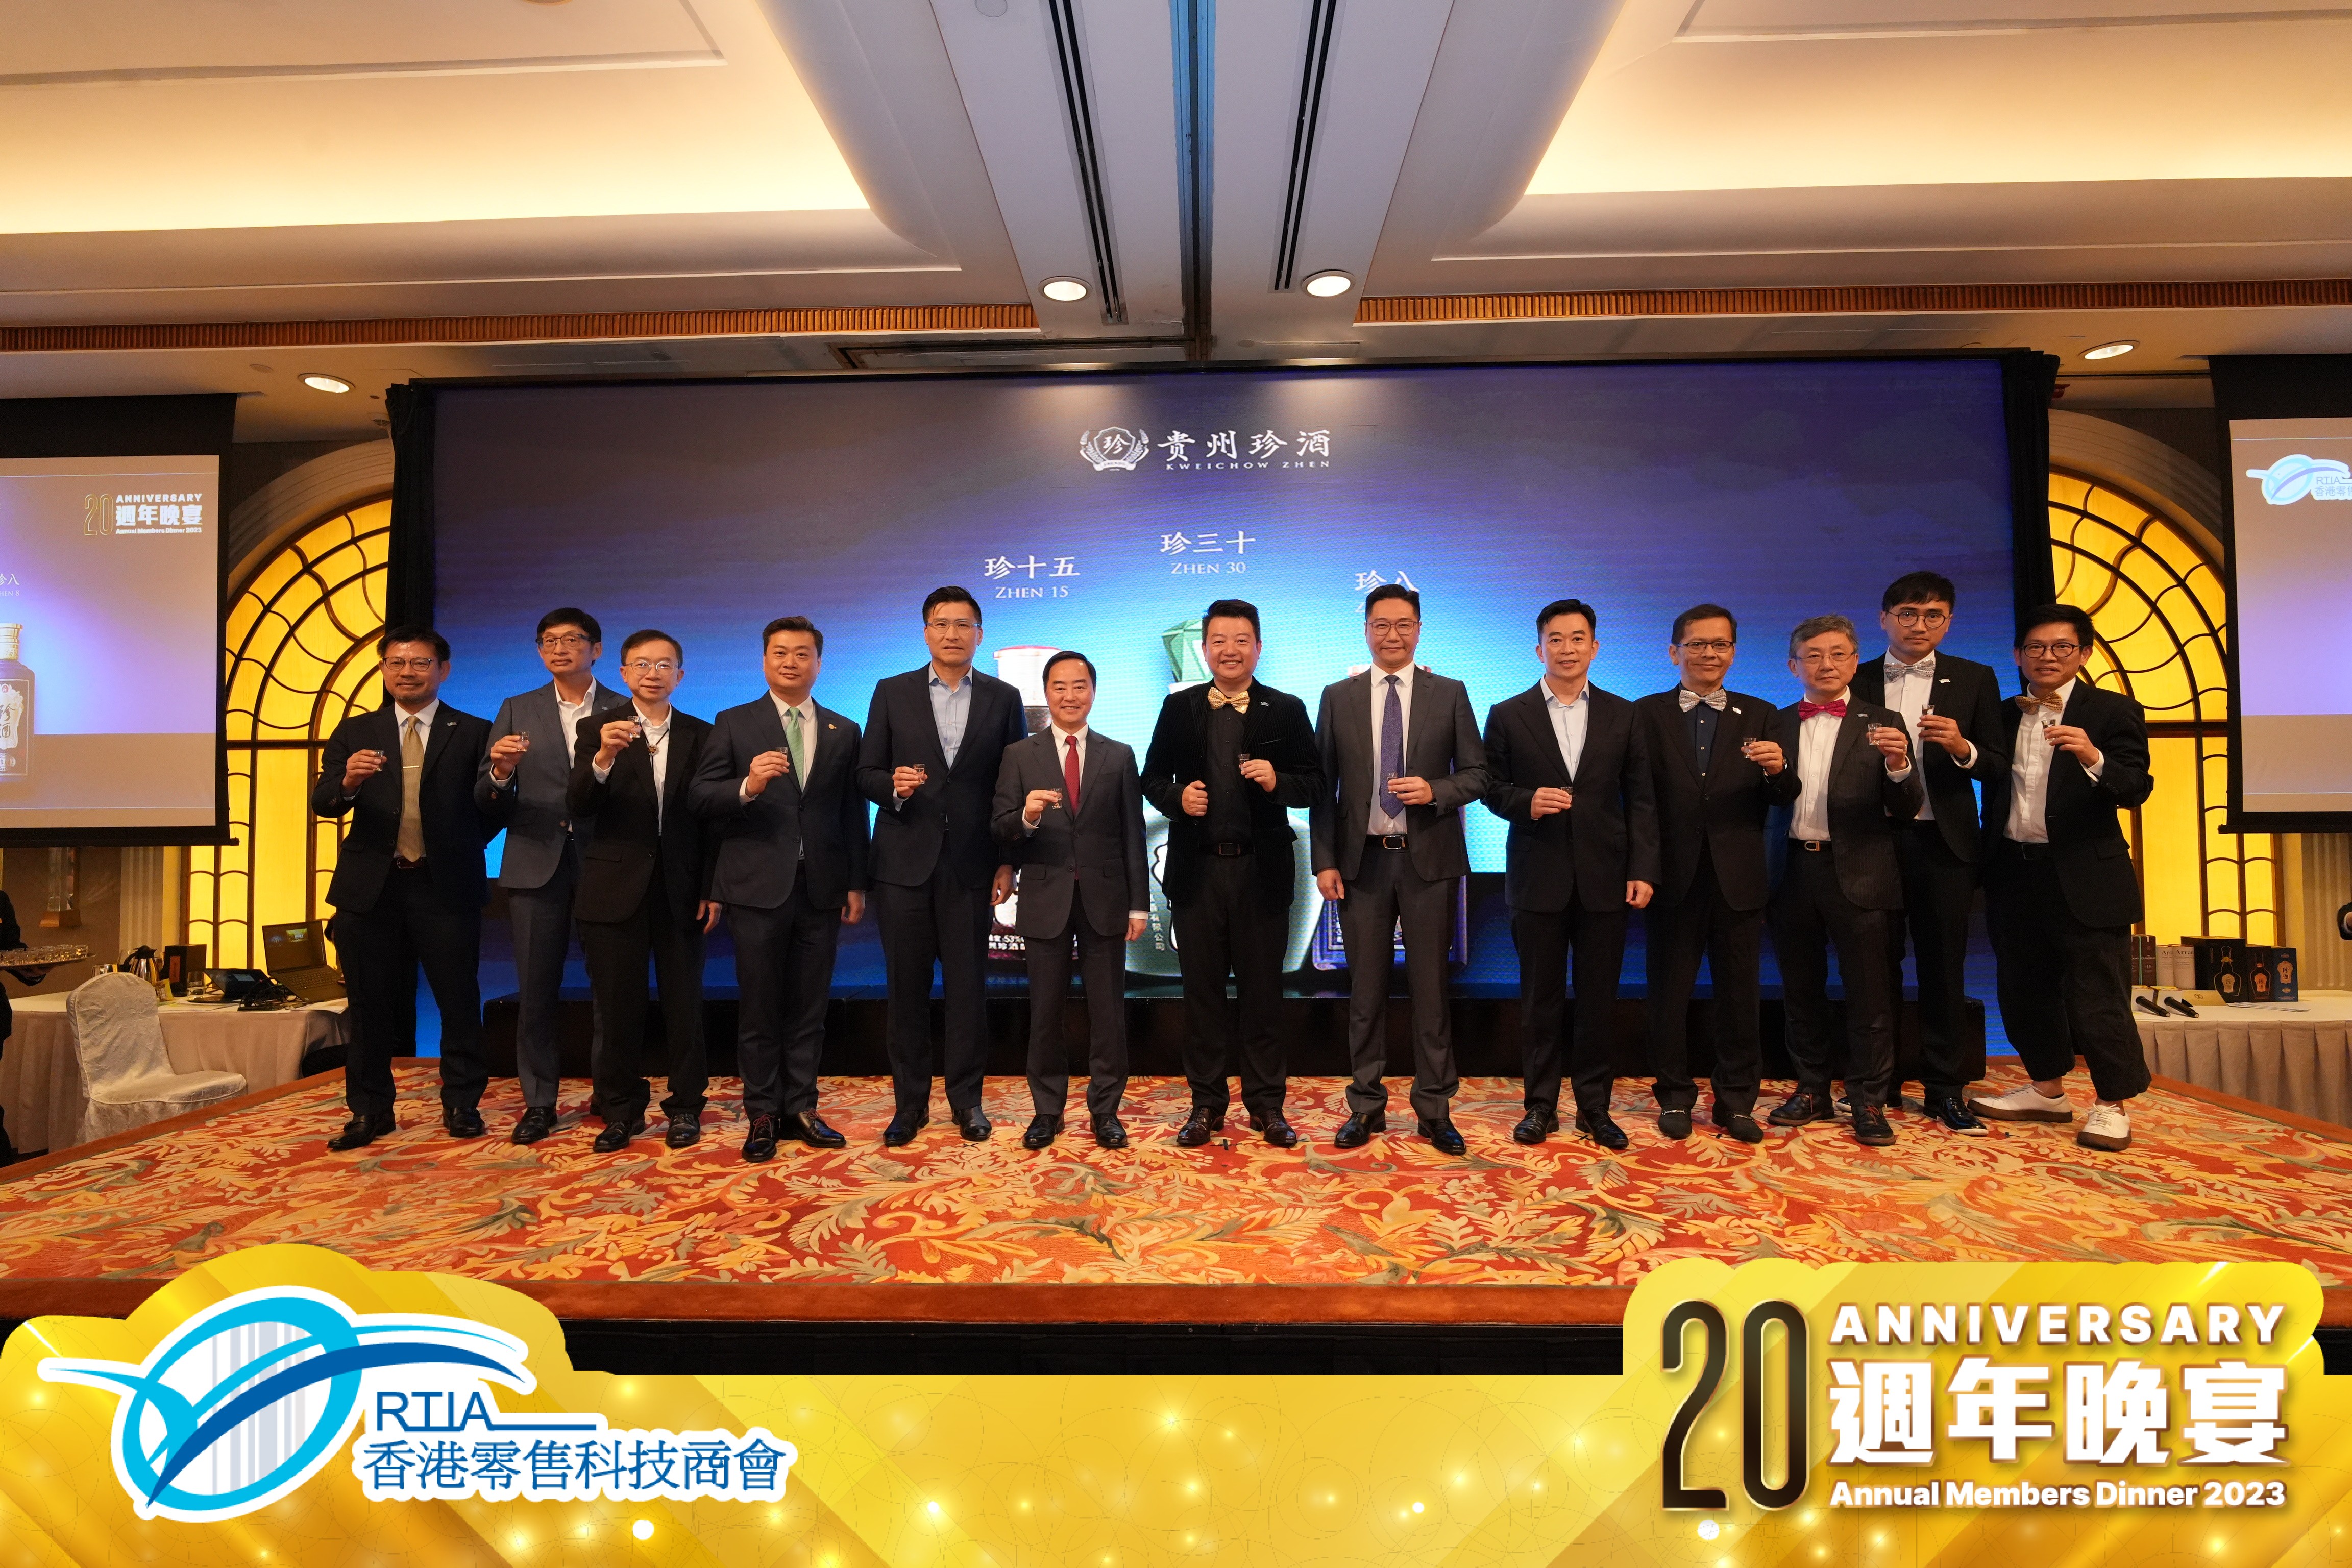 Mr. Paul Ng, Executive Director of ZJLD Group (fifth from right), Mr. Vincent So, Chairman of Hong Kong Retail Technology Industry Association (middle) and guests of Hong Kong Retail Technology Industry Association conducted a toast ceremony with “Zhen 30”.